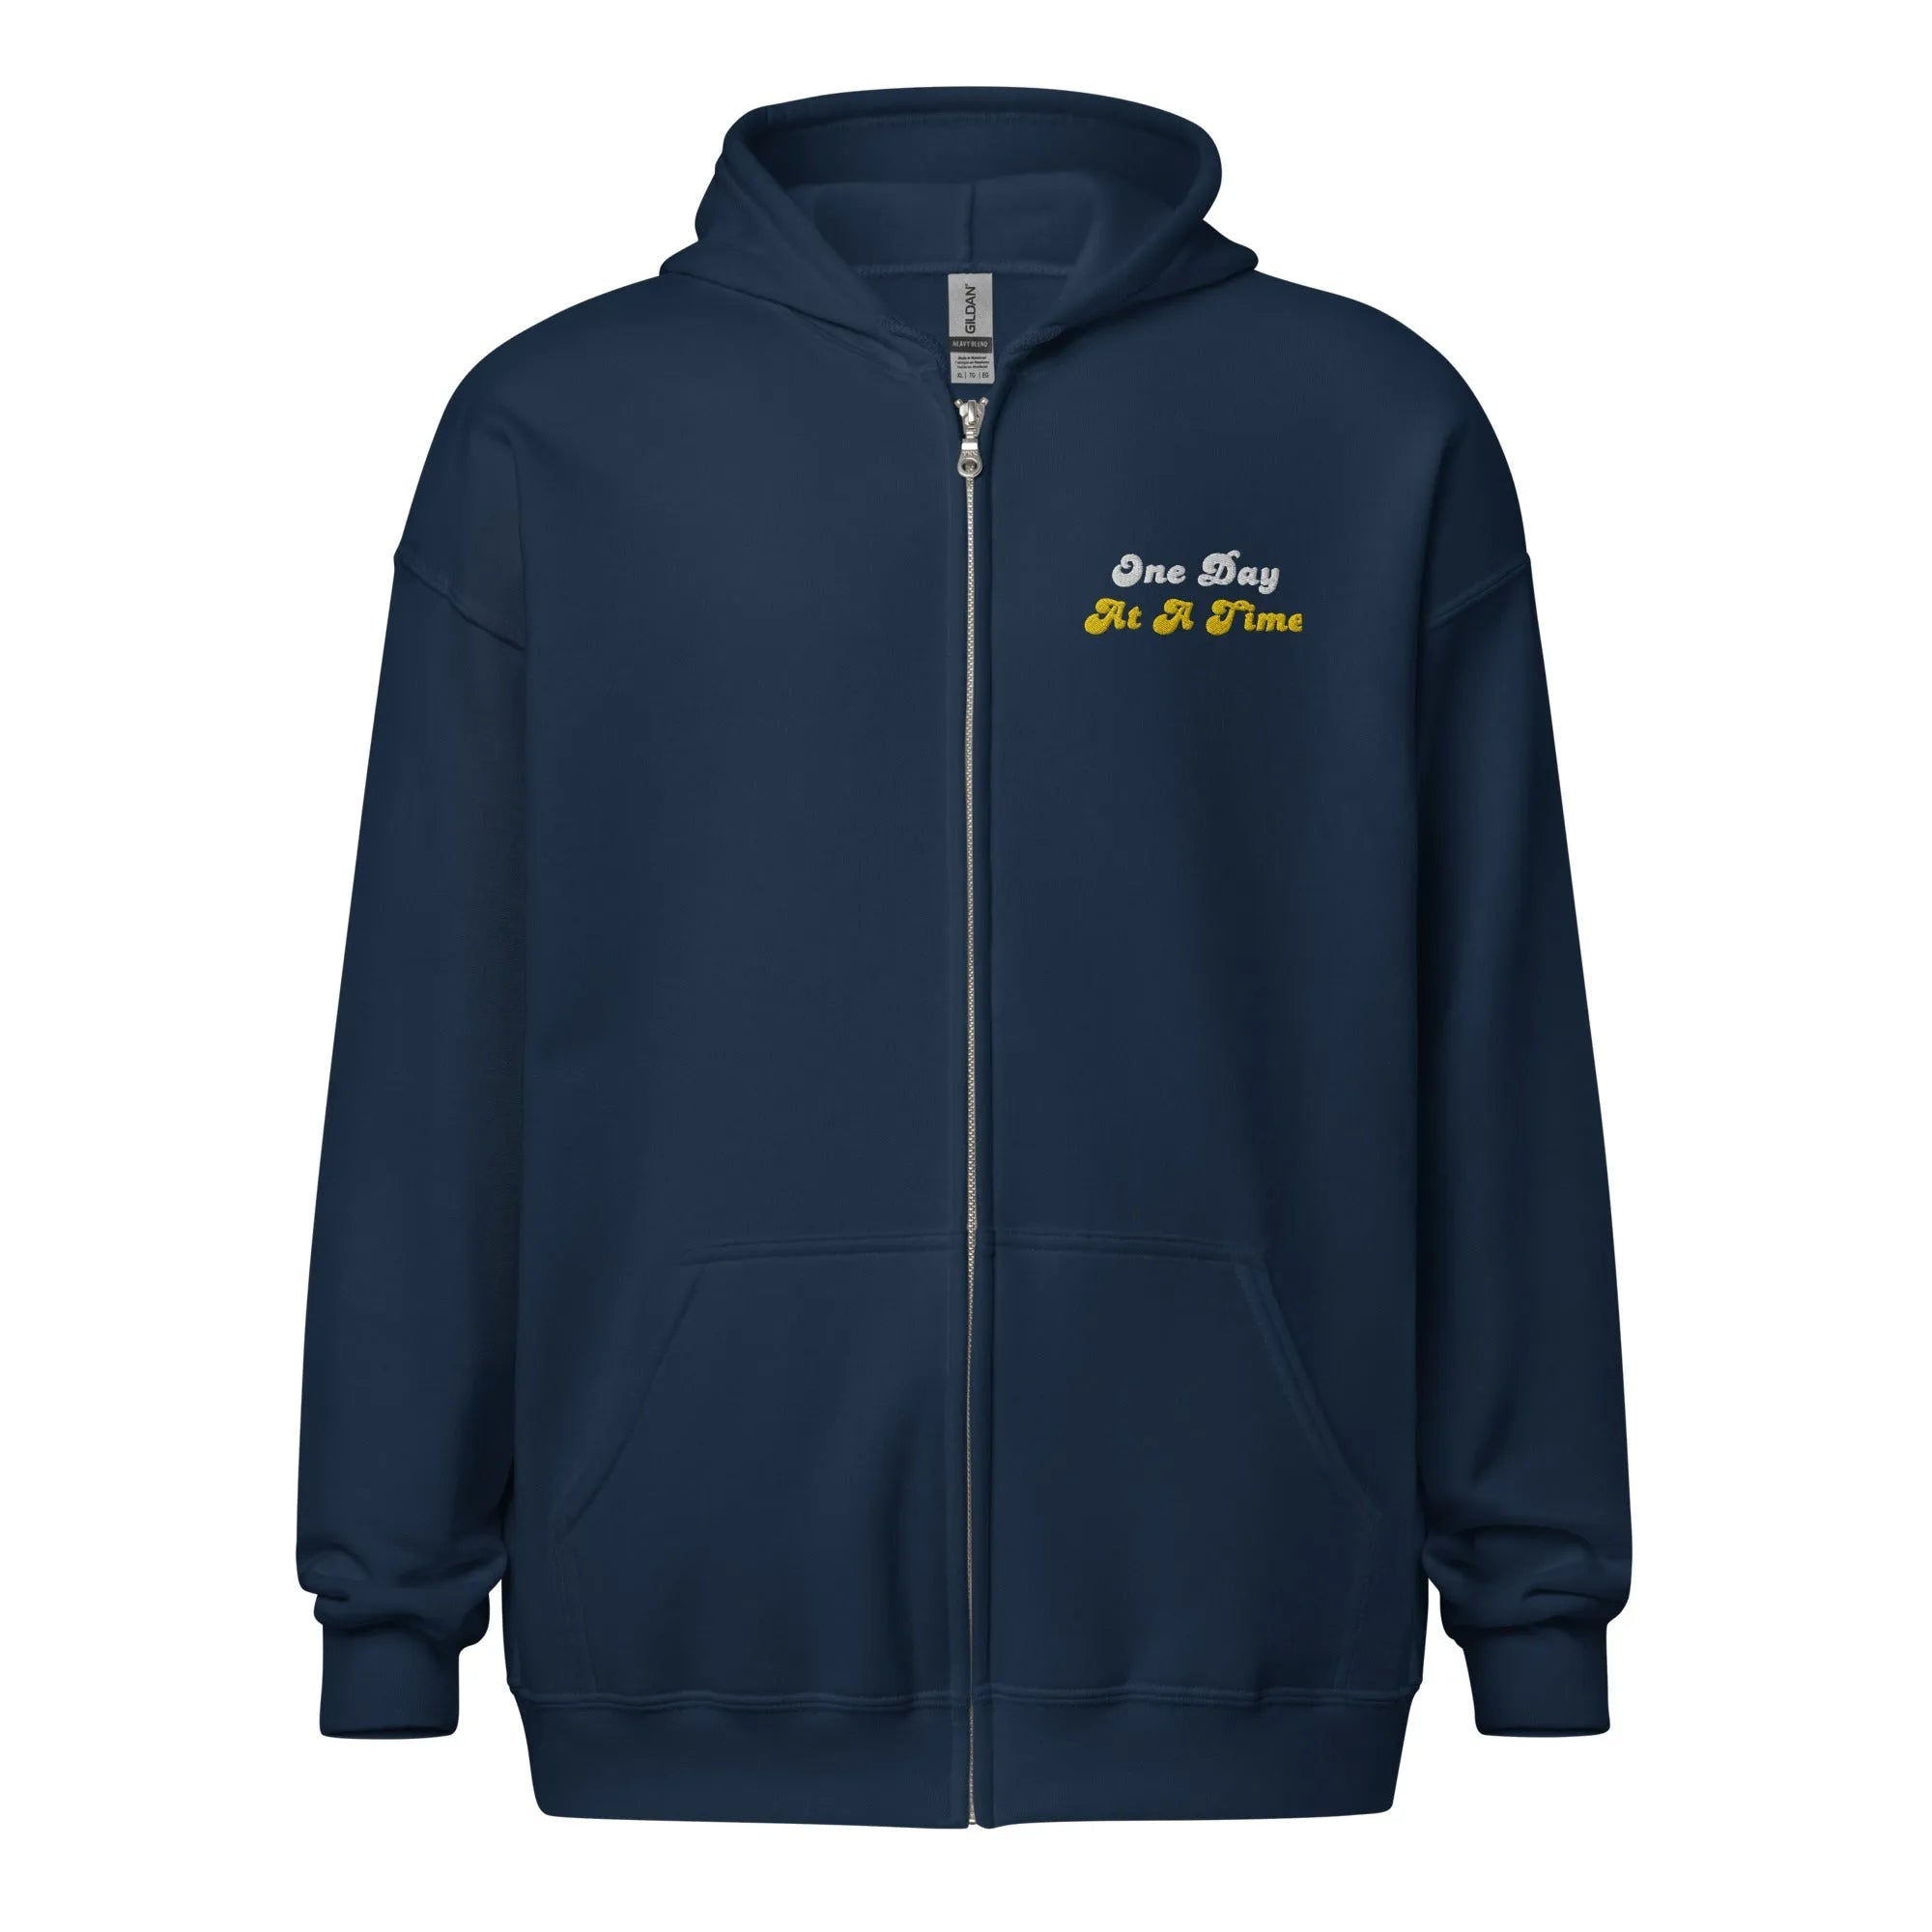 One Day At A Time - Embroidered Zip-Up Hoodie - | Sobervation